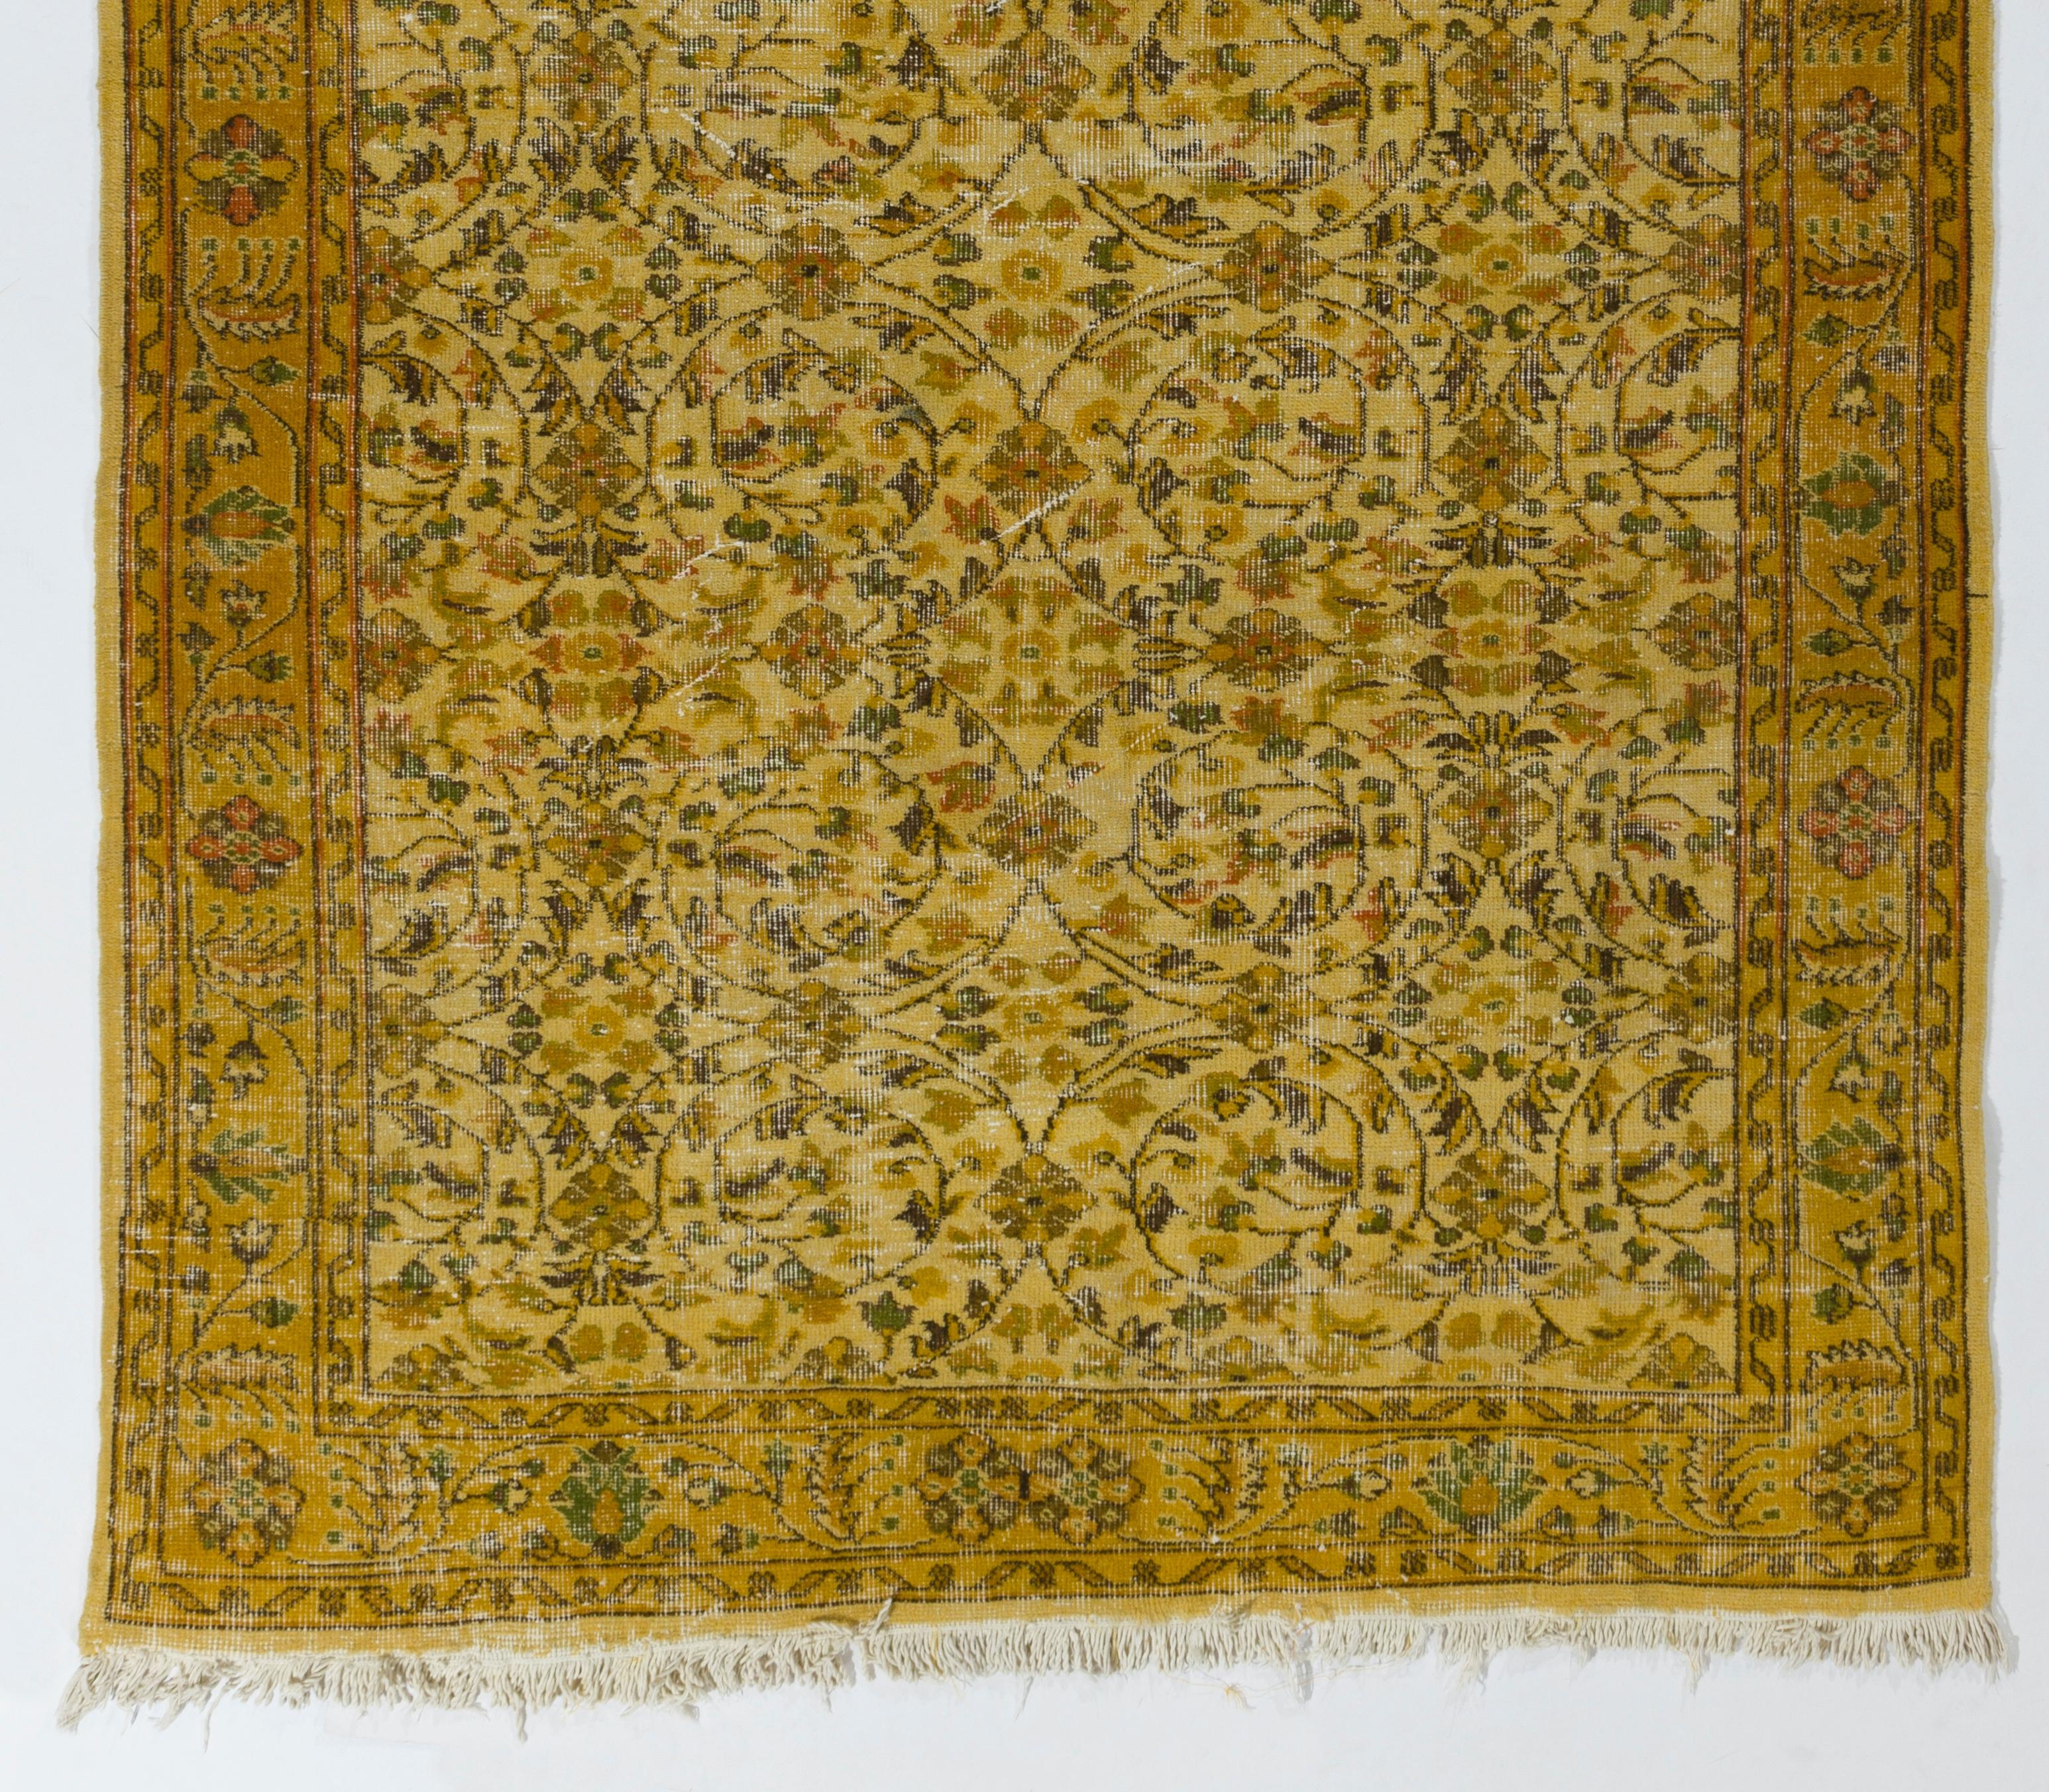 Hand-Knotted 5.3x9 Ft Vintage Floral Handmade Turkish Rug in Yellow, Room Size Modern Carpet For Sale